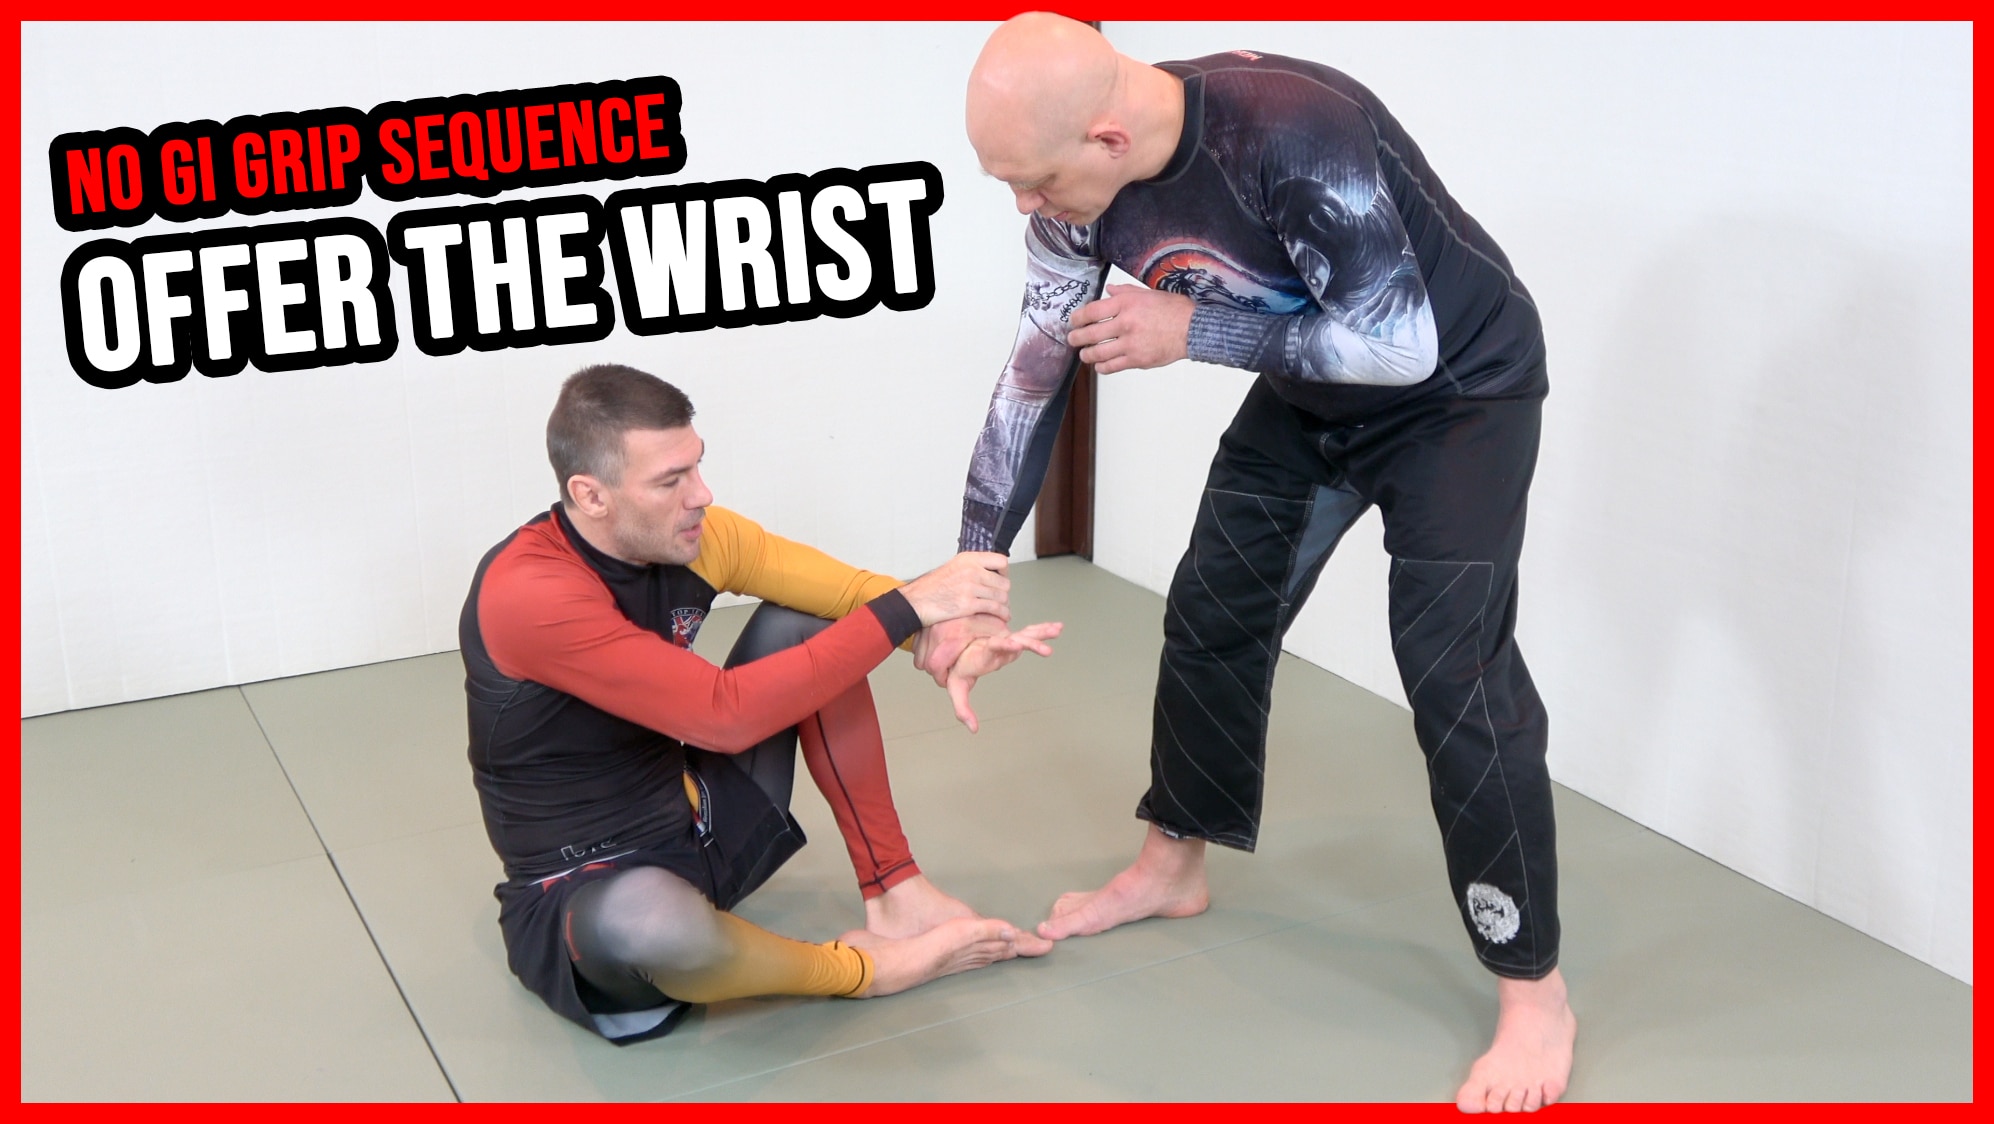 The "offer the wrist" no gi gripping stratgegy